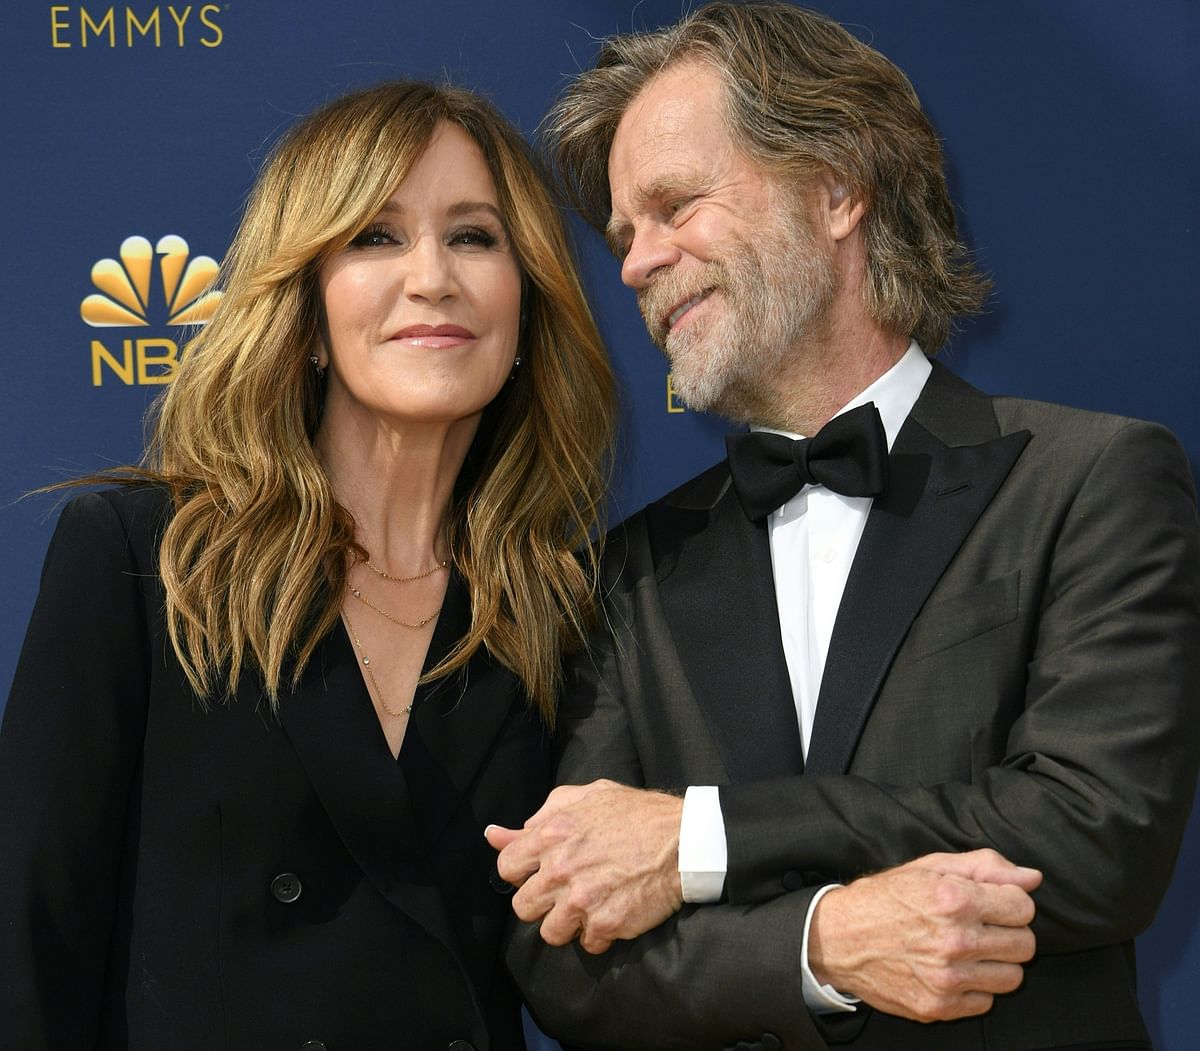 In this file photo taken on 17 September 2018 Lead actor in a comedy series nominee William H. Macy and his wife actress Felicity Huffman arrive for the 70th Emmy Awards at the Microsoft Theatre in Los Angeles.